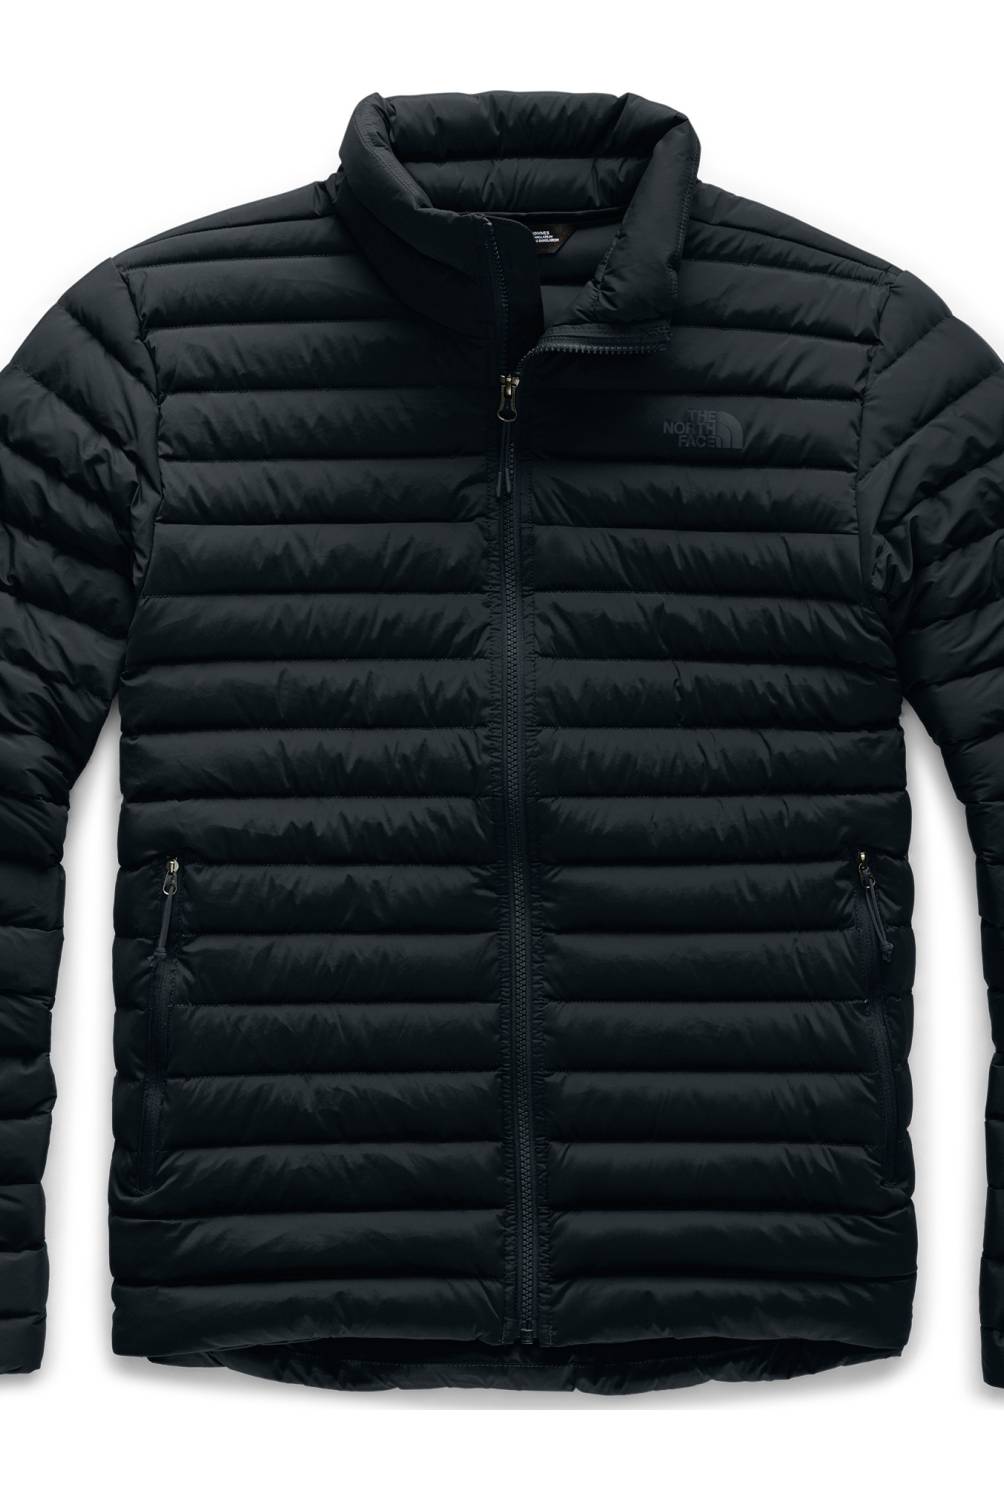 THE NORTH FACE - Parka Stretch Down Hombre